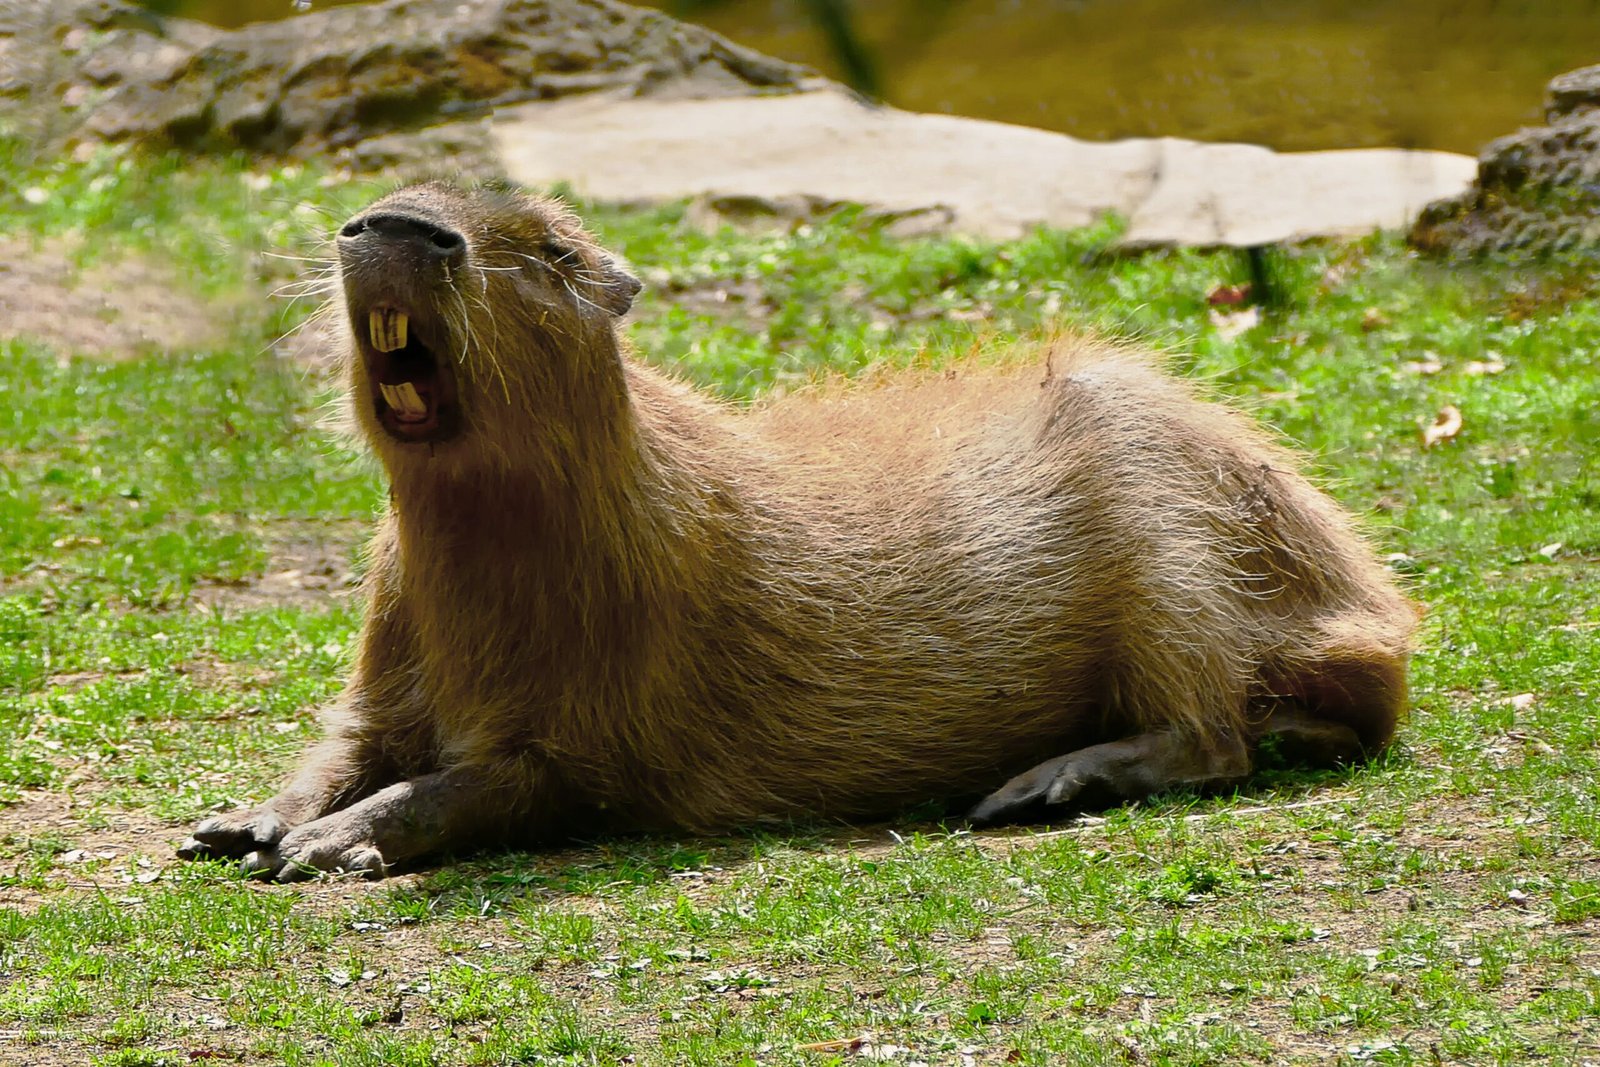 Where to Find Capybaras for Sale as Pets